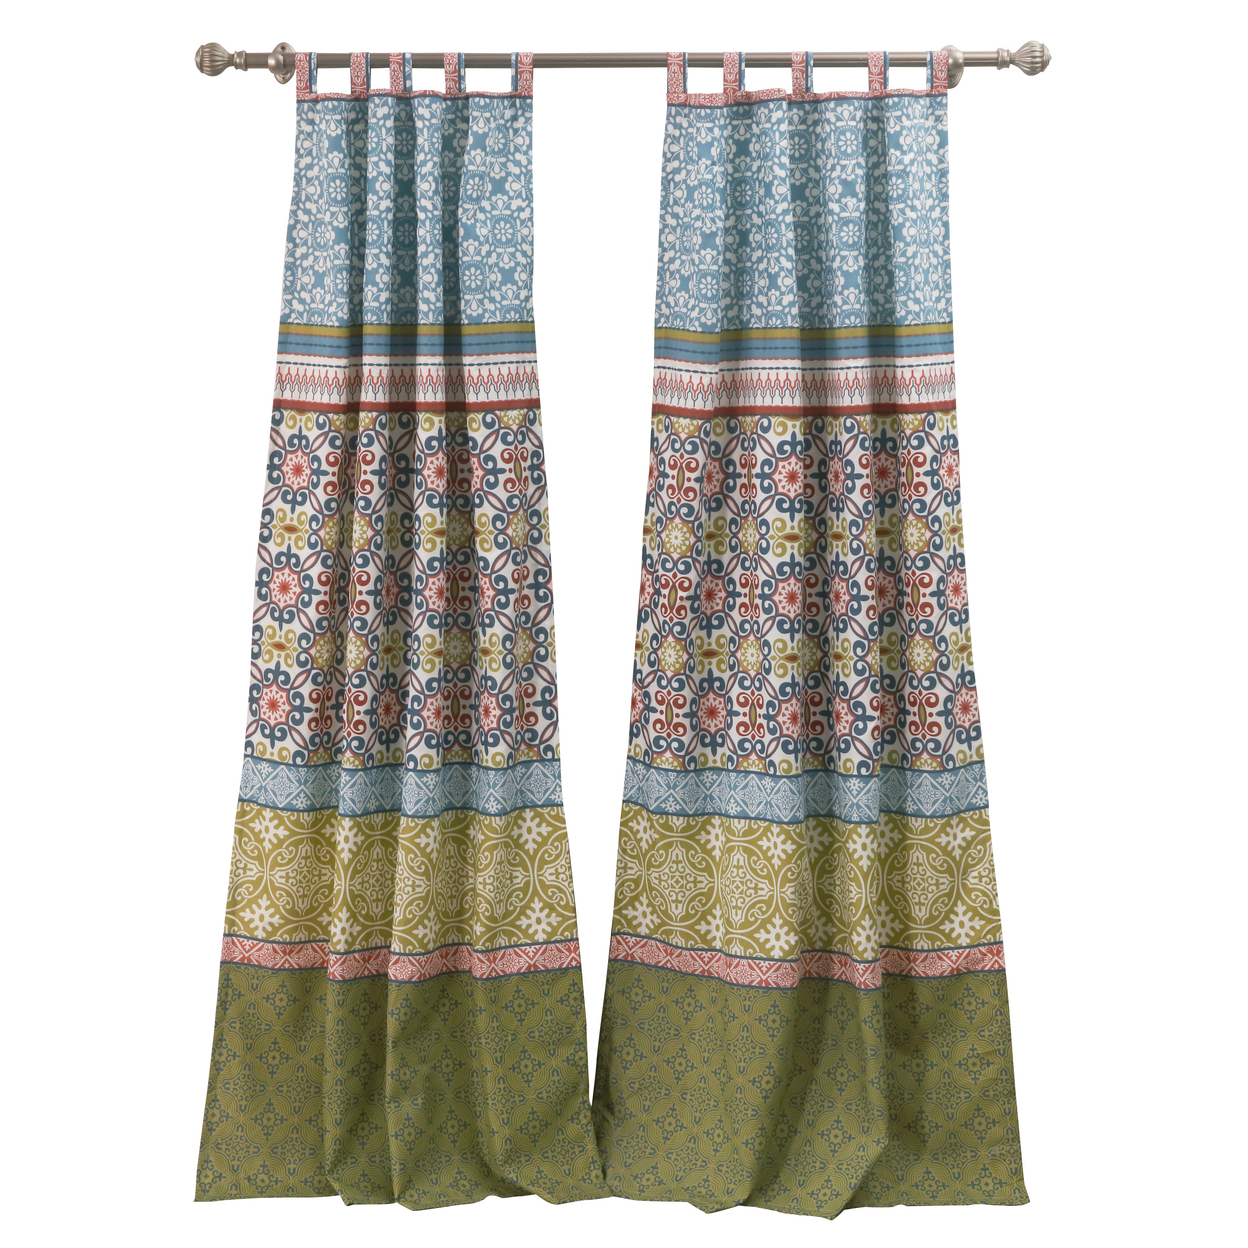 Kaw Set Of 2 Panel Curtains, Multicolor Geometric Patterns, Polyester